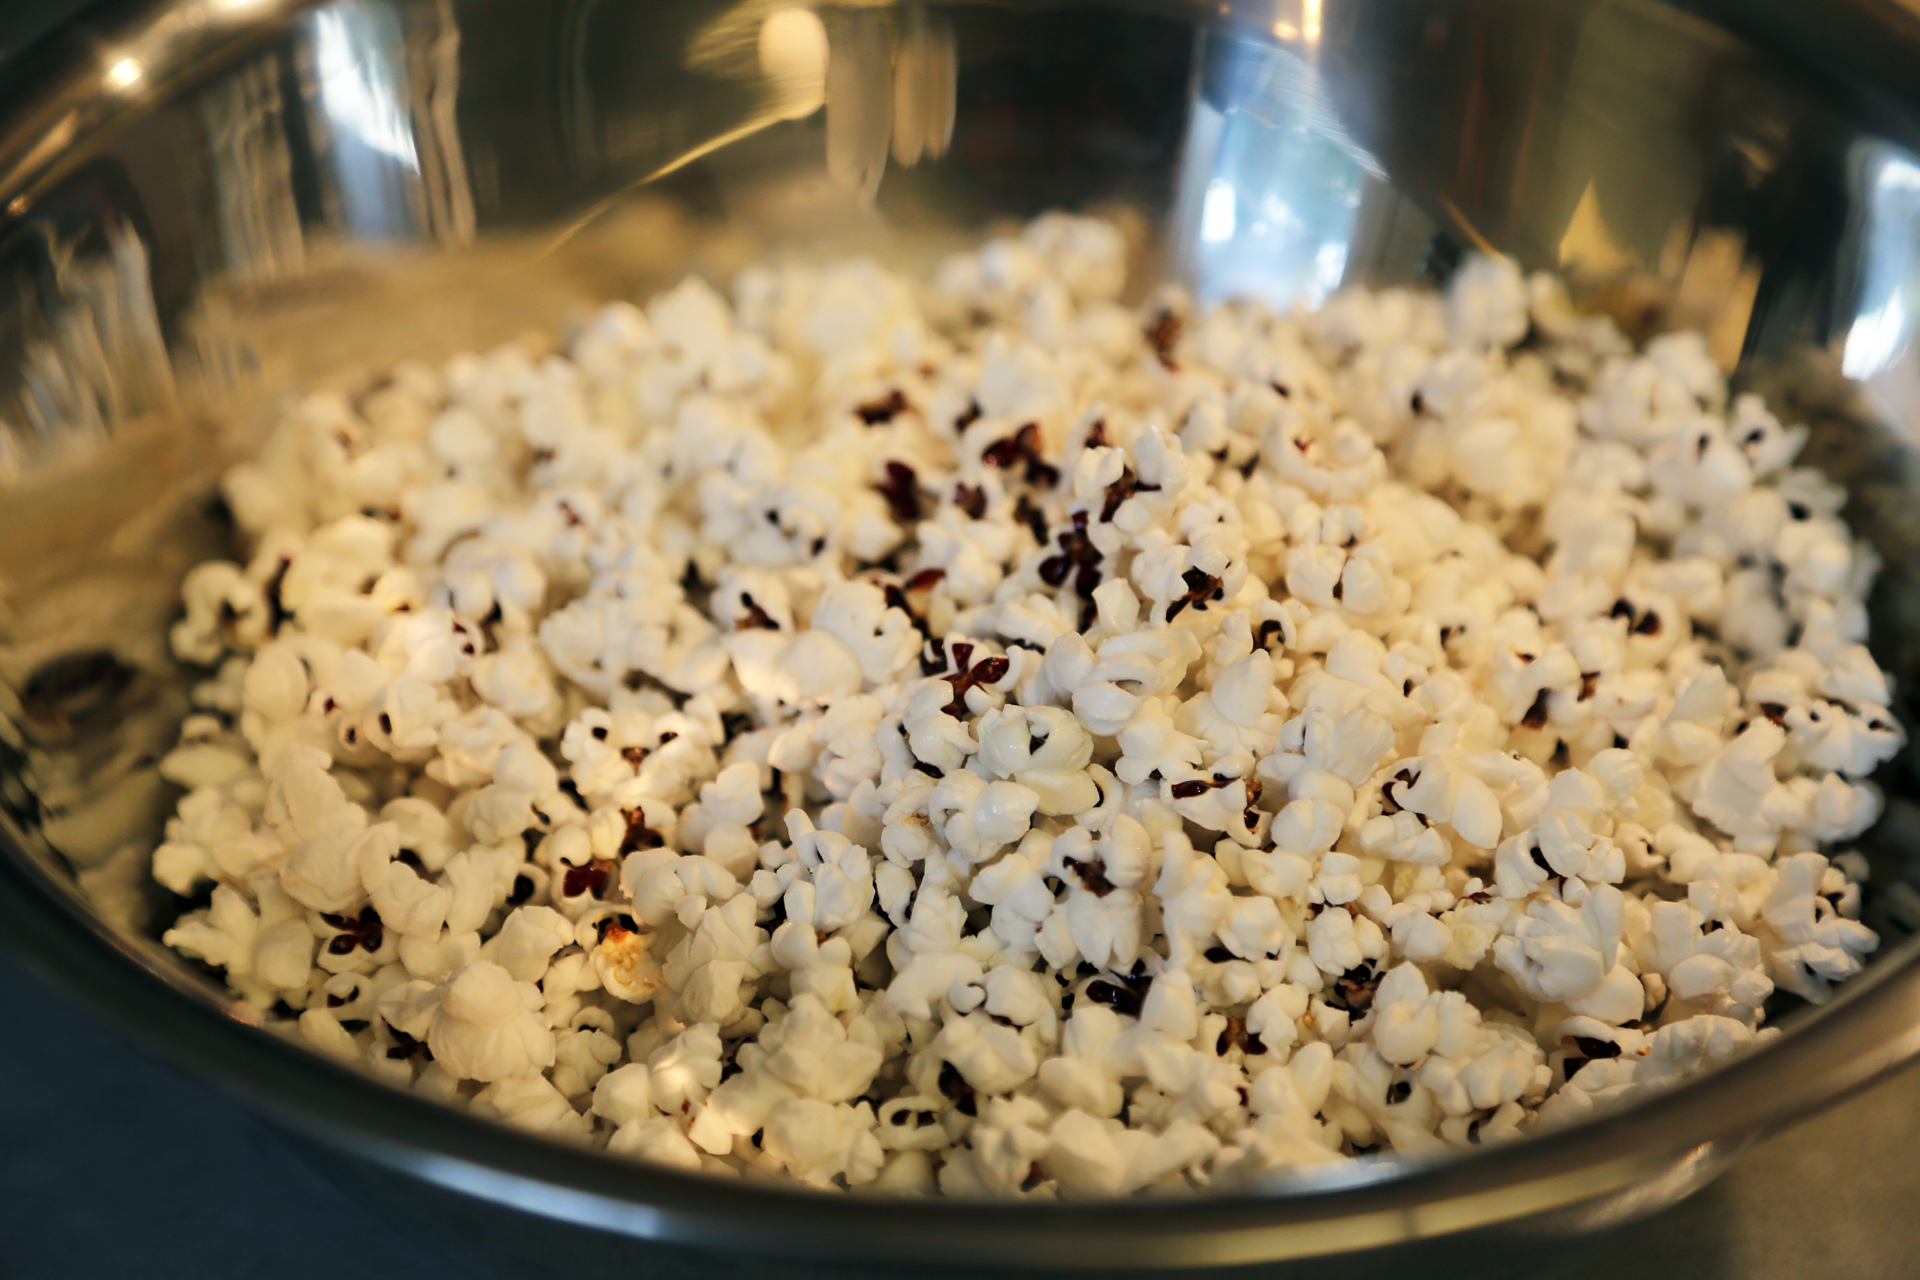 Pop the popcorn according to package directions, transfer to a large mixing bowl.